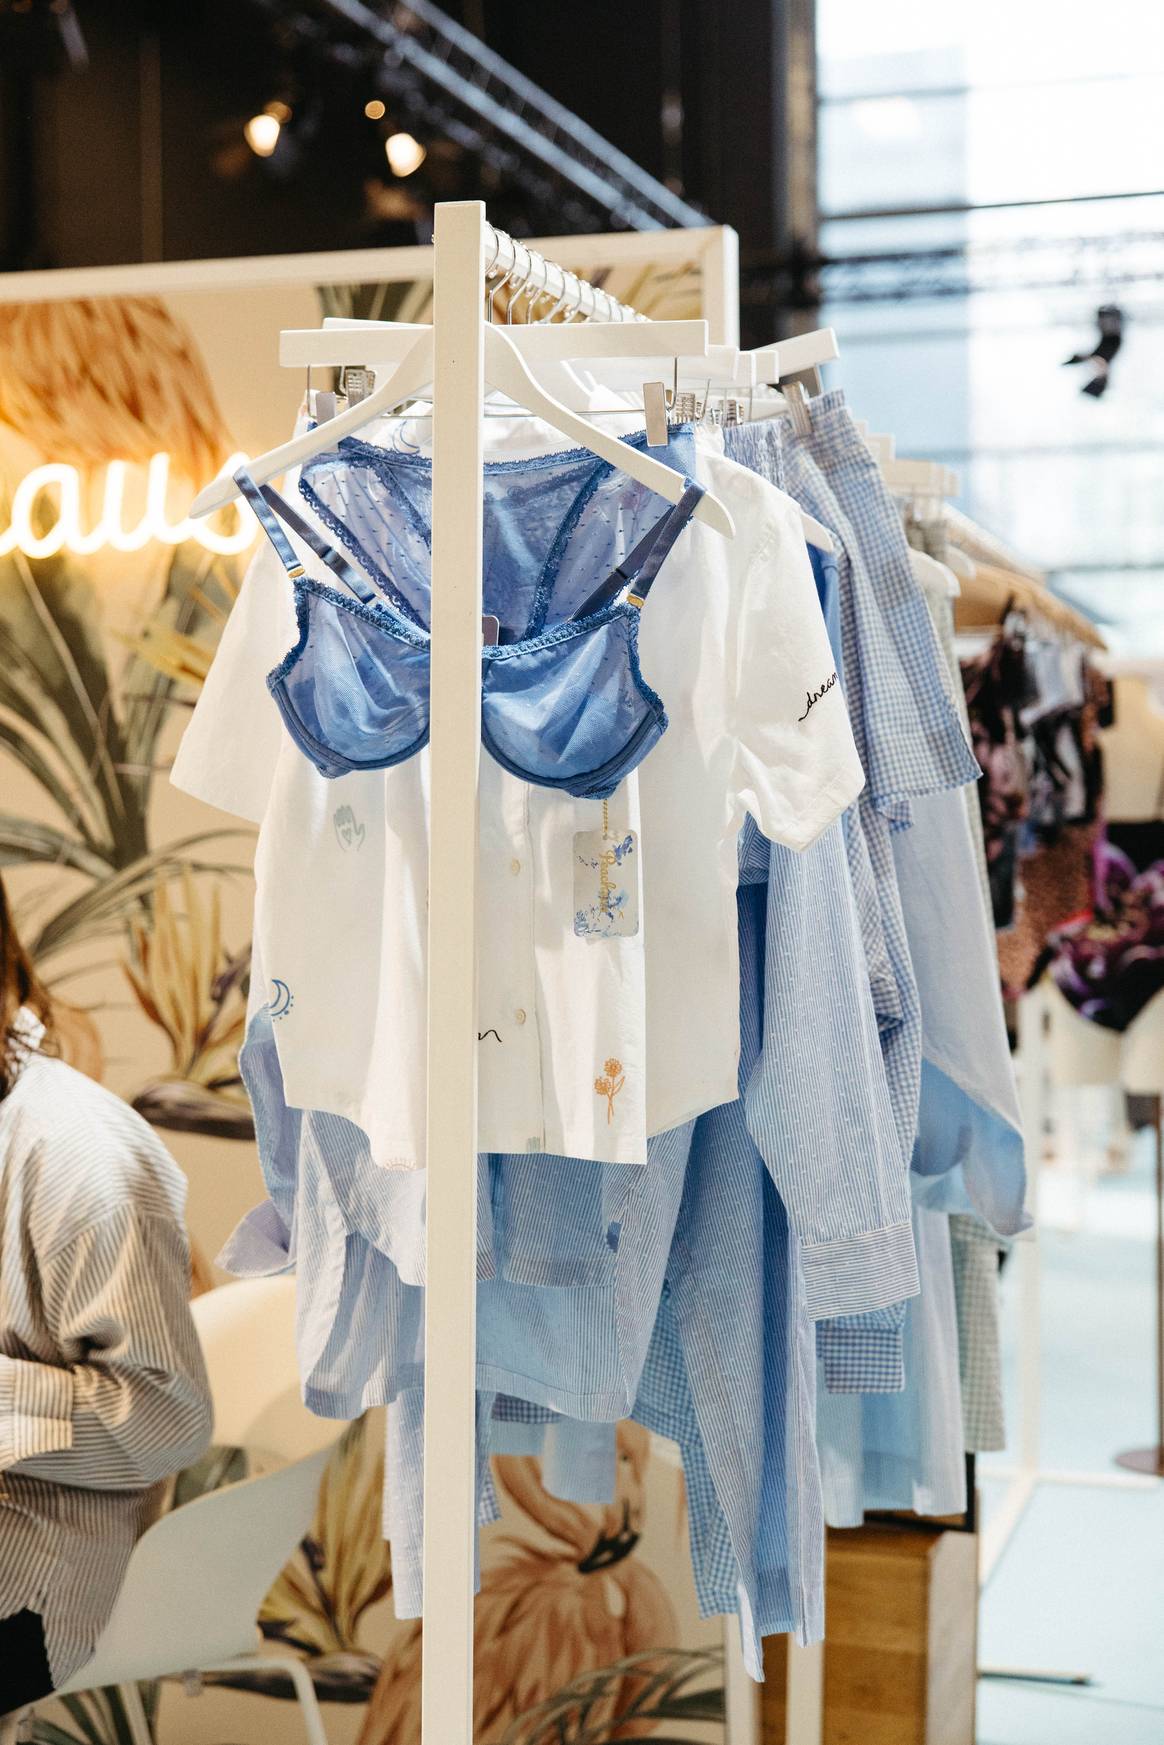 Peachaus’ founder on setting a new precedent for lingerie and business